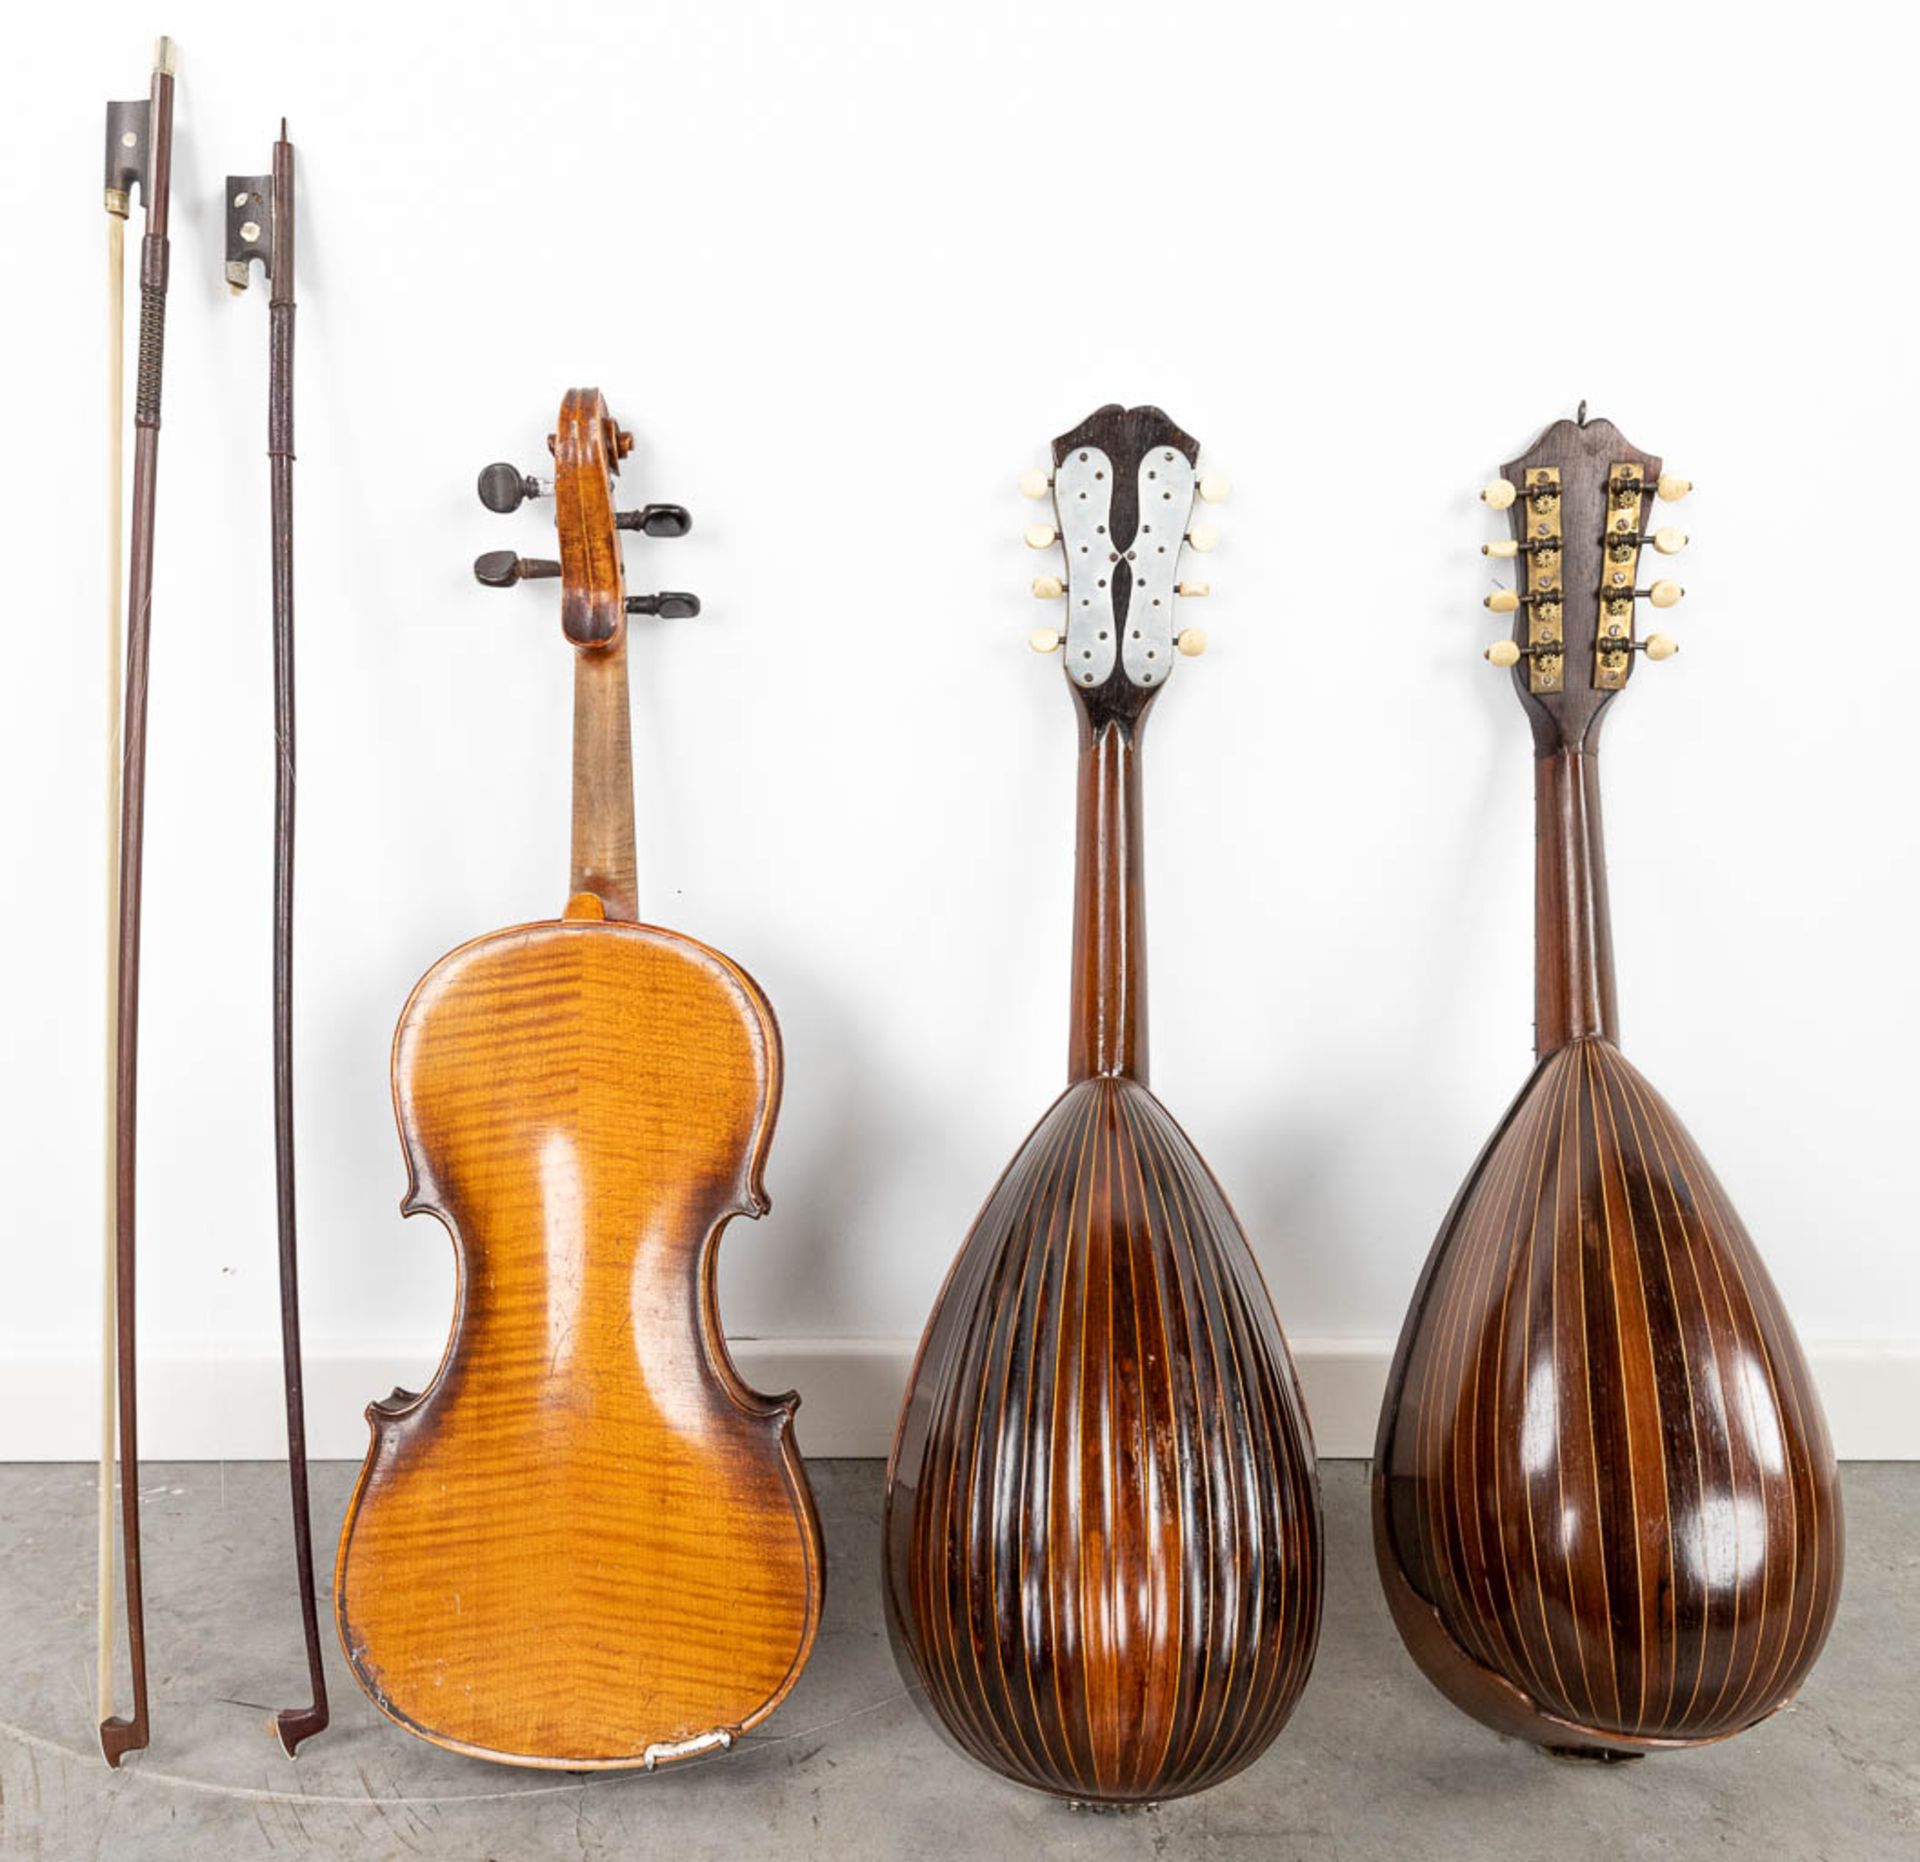 A collection of 3 musical instruments: 2 mandolines and a violin, after a model made by Stradivarius - Image 55 of 56